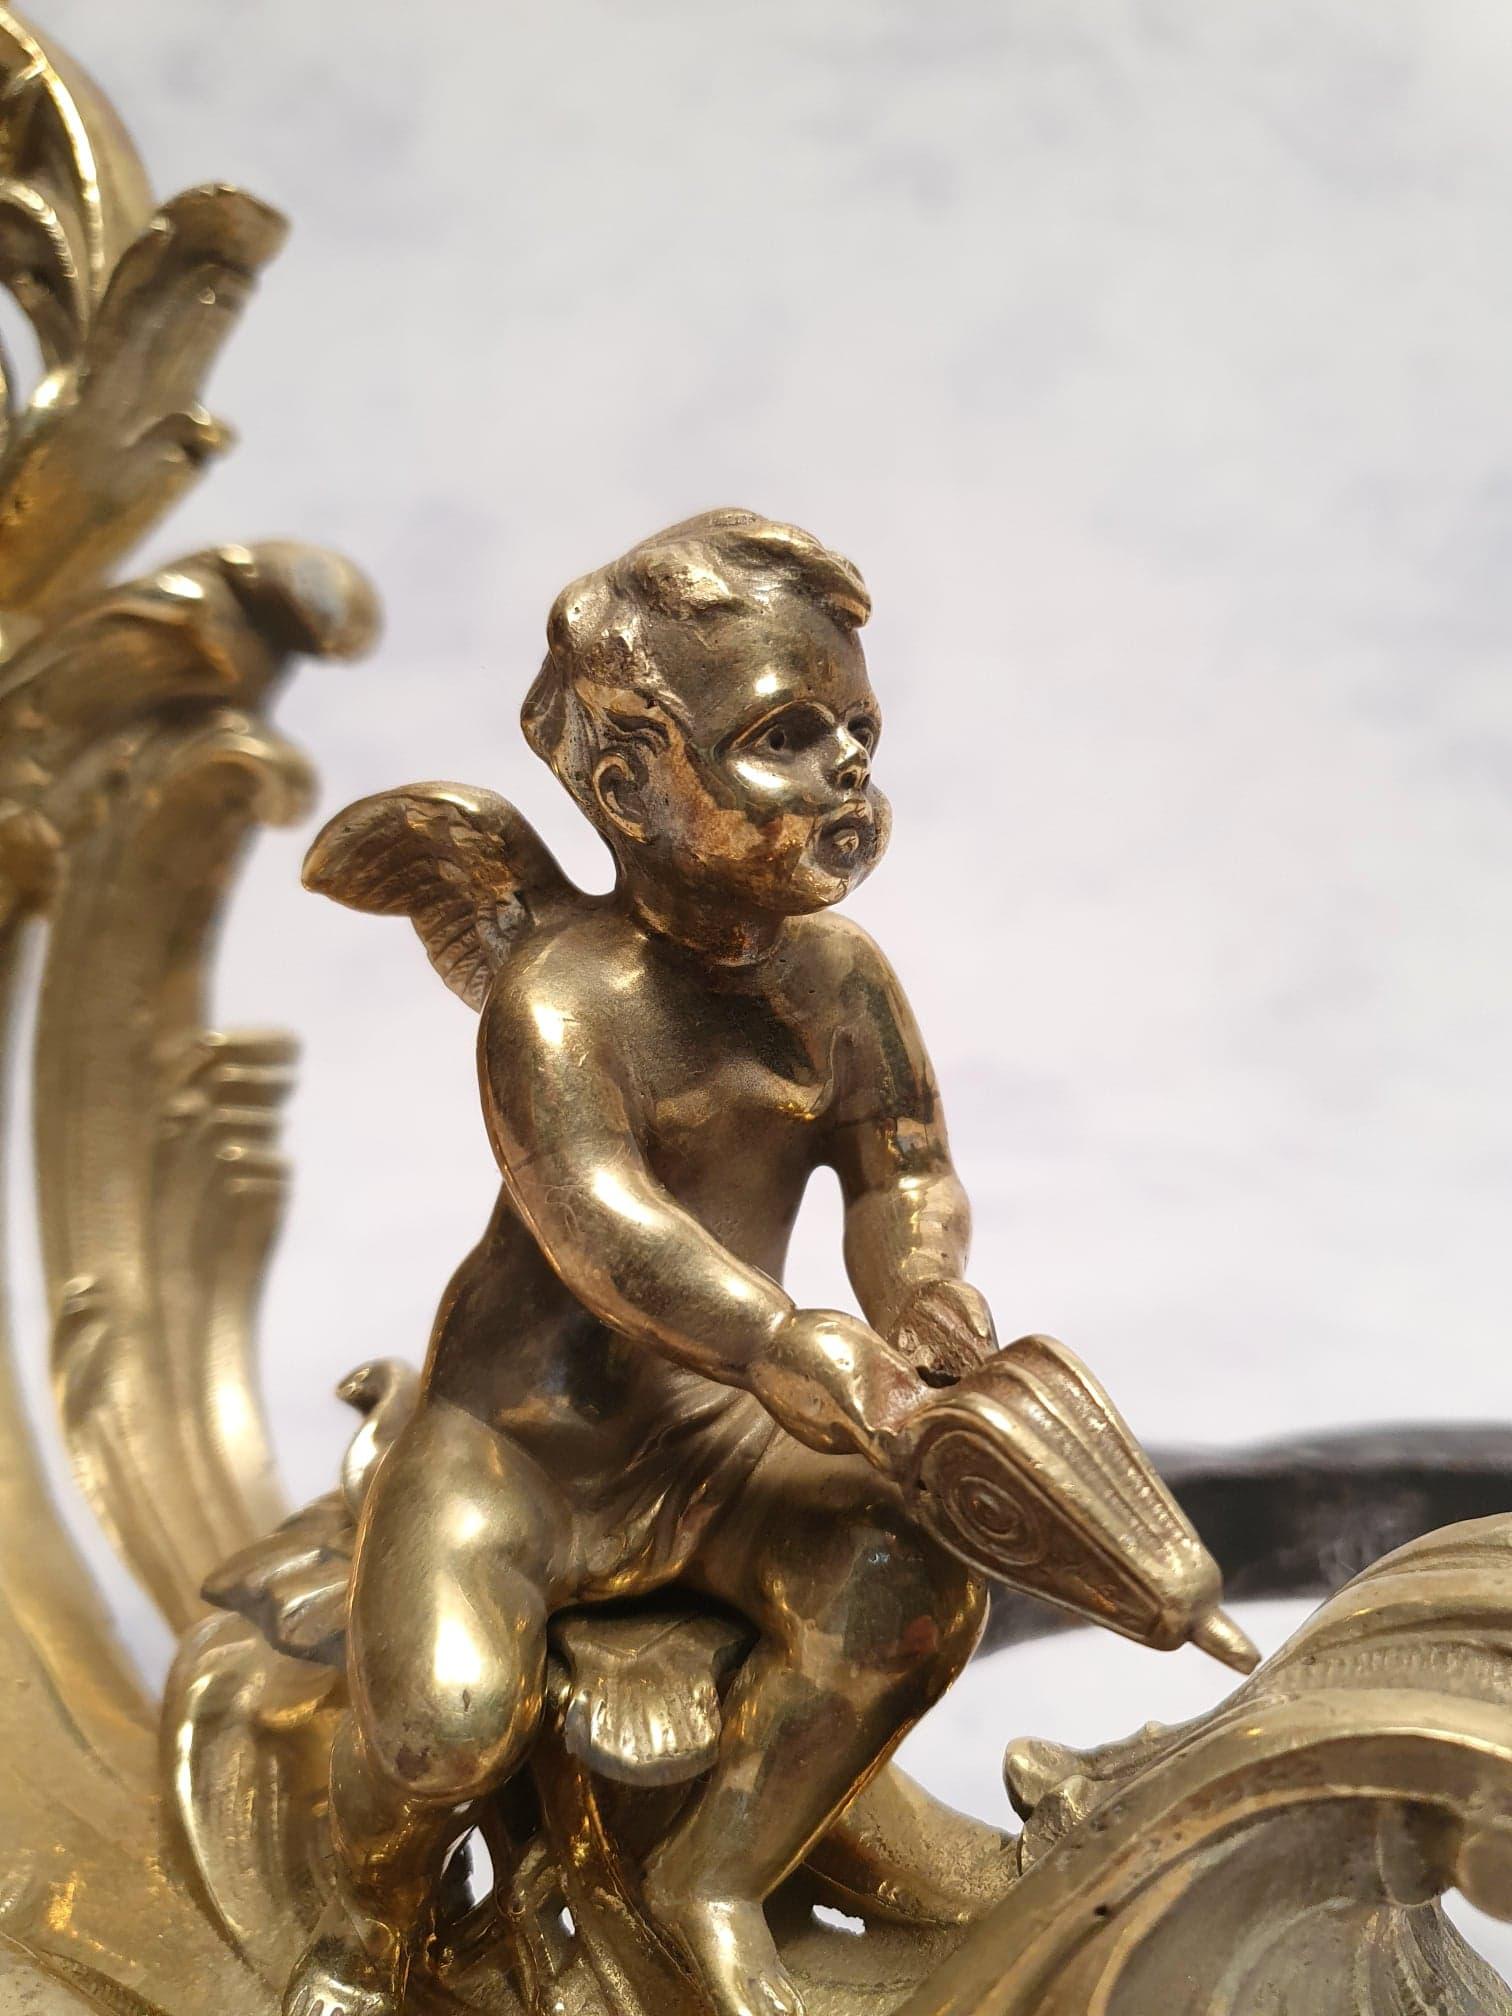 Superb pair of Louis XV style andirons in chiseled bronze. Each of the andirons is decorated with a putto, one male with a bellows and the other female. These two winged cherubs are nicely chiseled, as are the Rocaille decorations of these andirons.